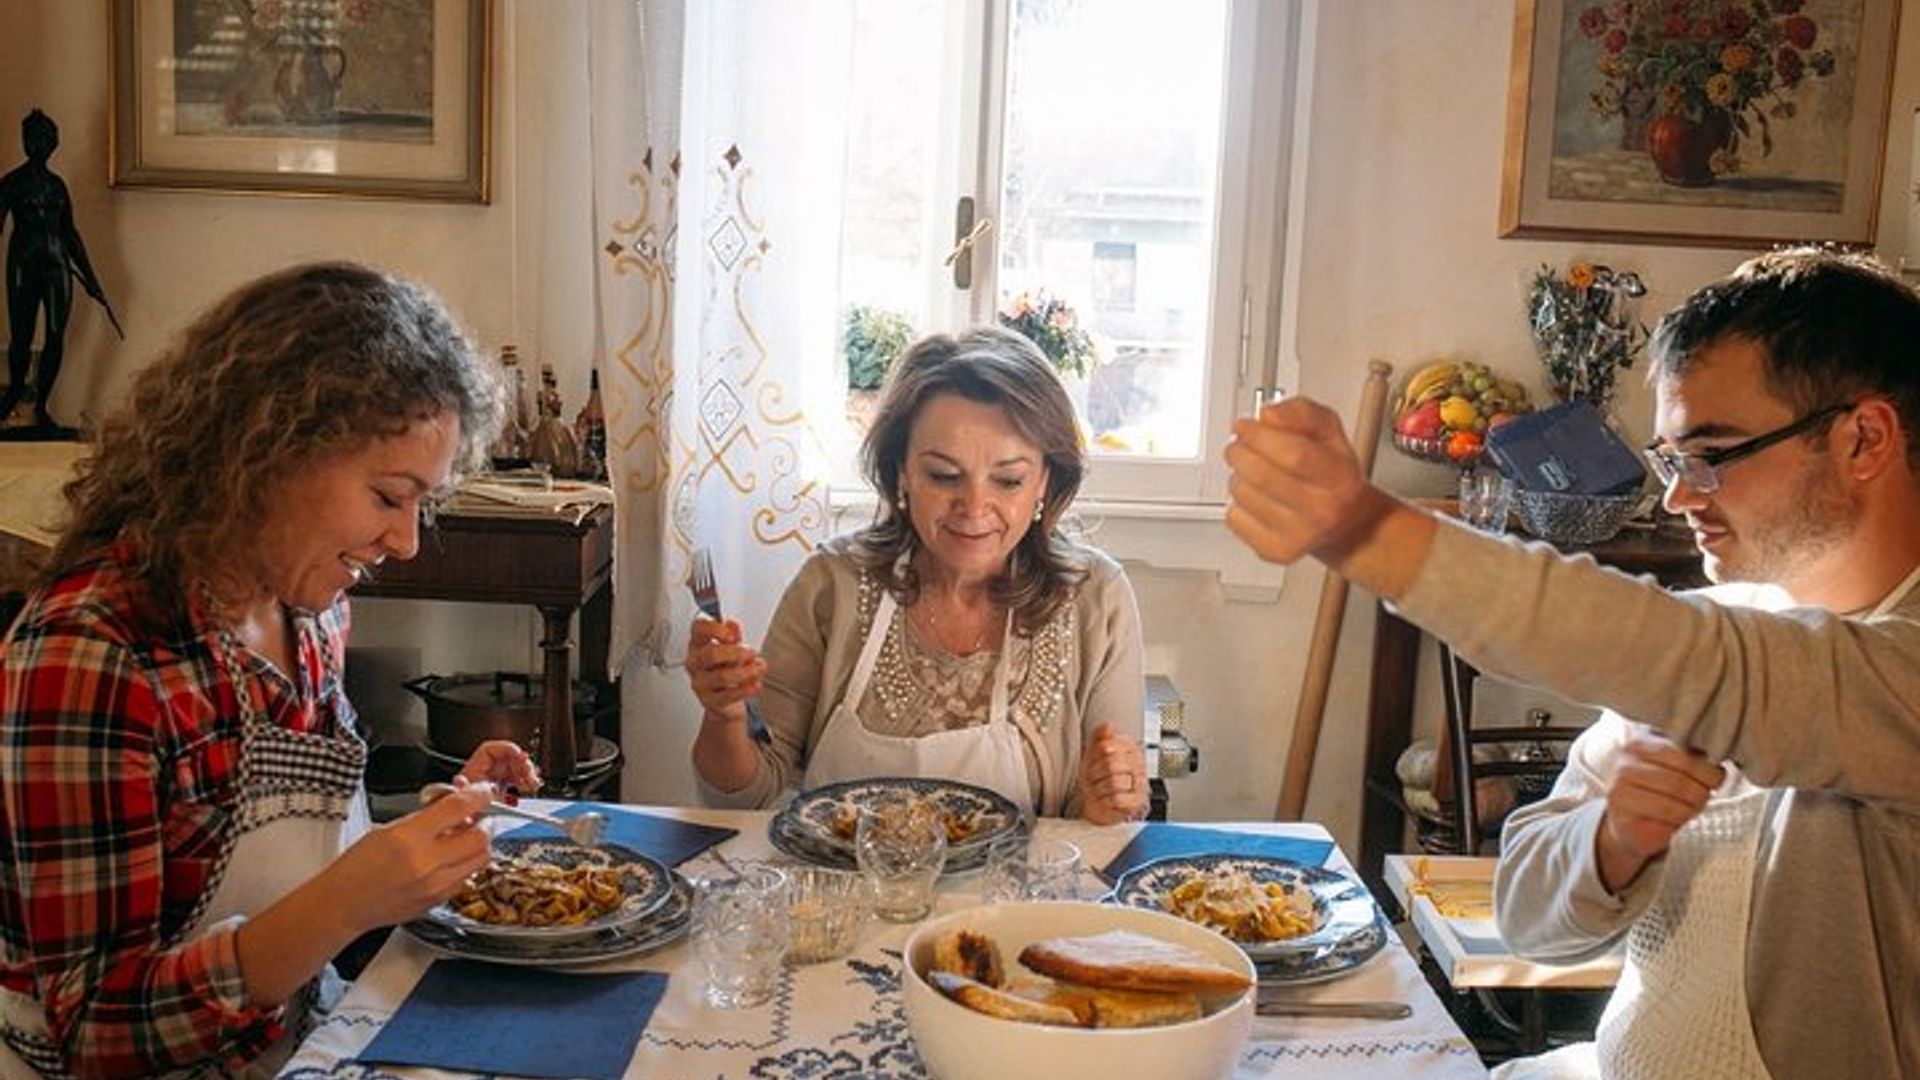 Dining experience at a local's home in Trieste with show cooking